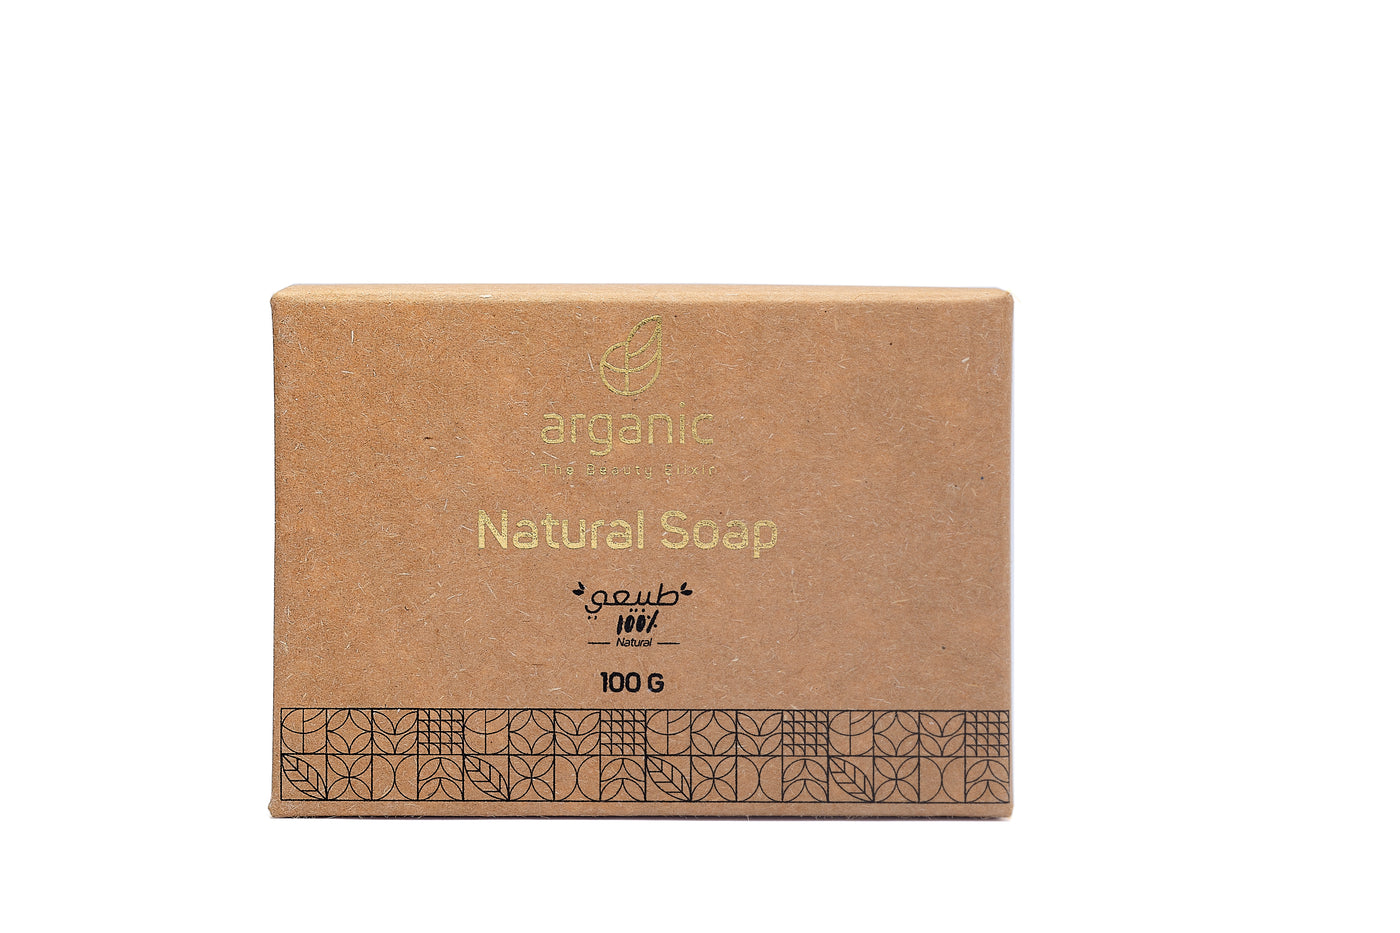 Eco-friendly packaging for natural soap by arganic brand.